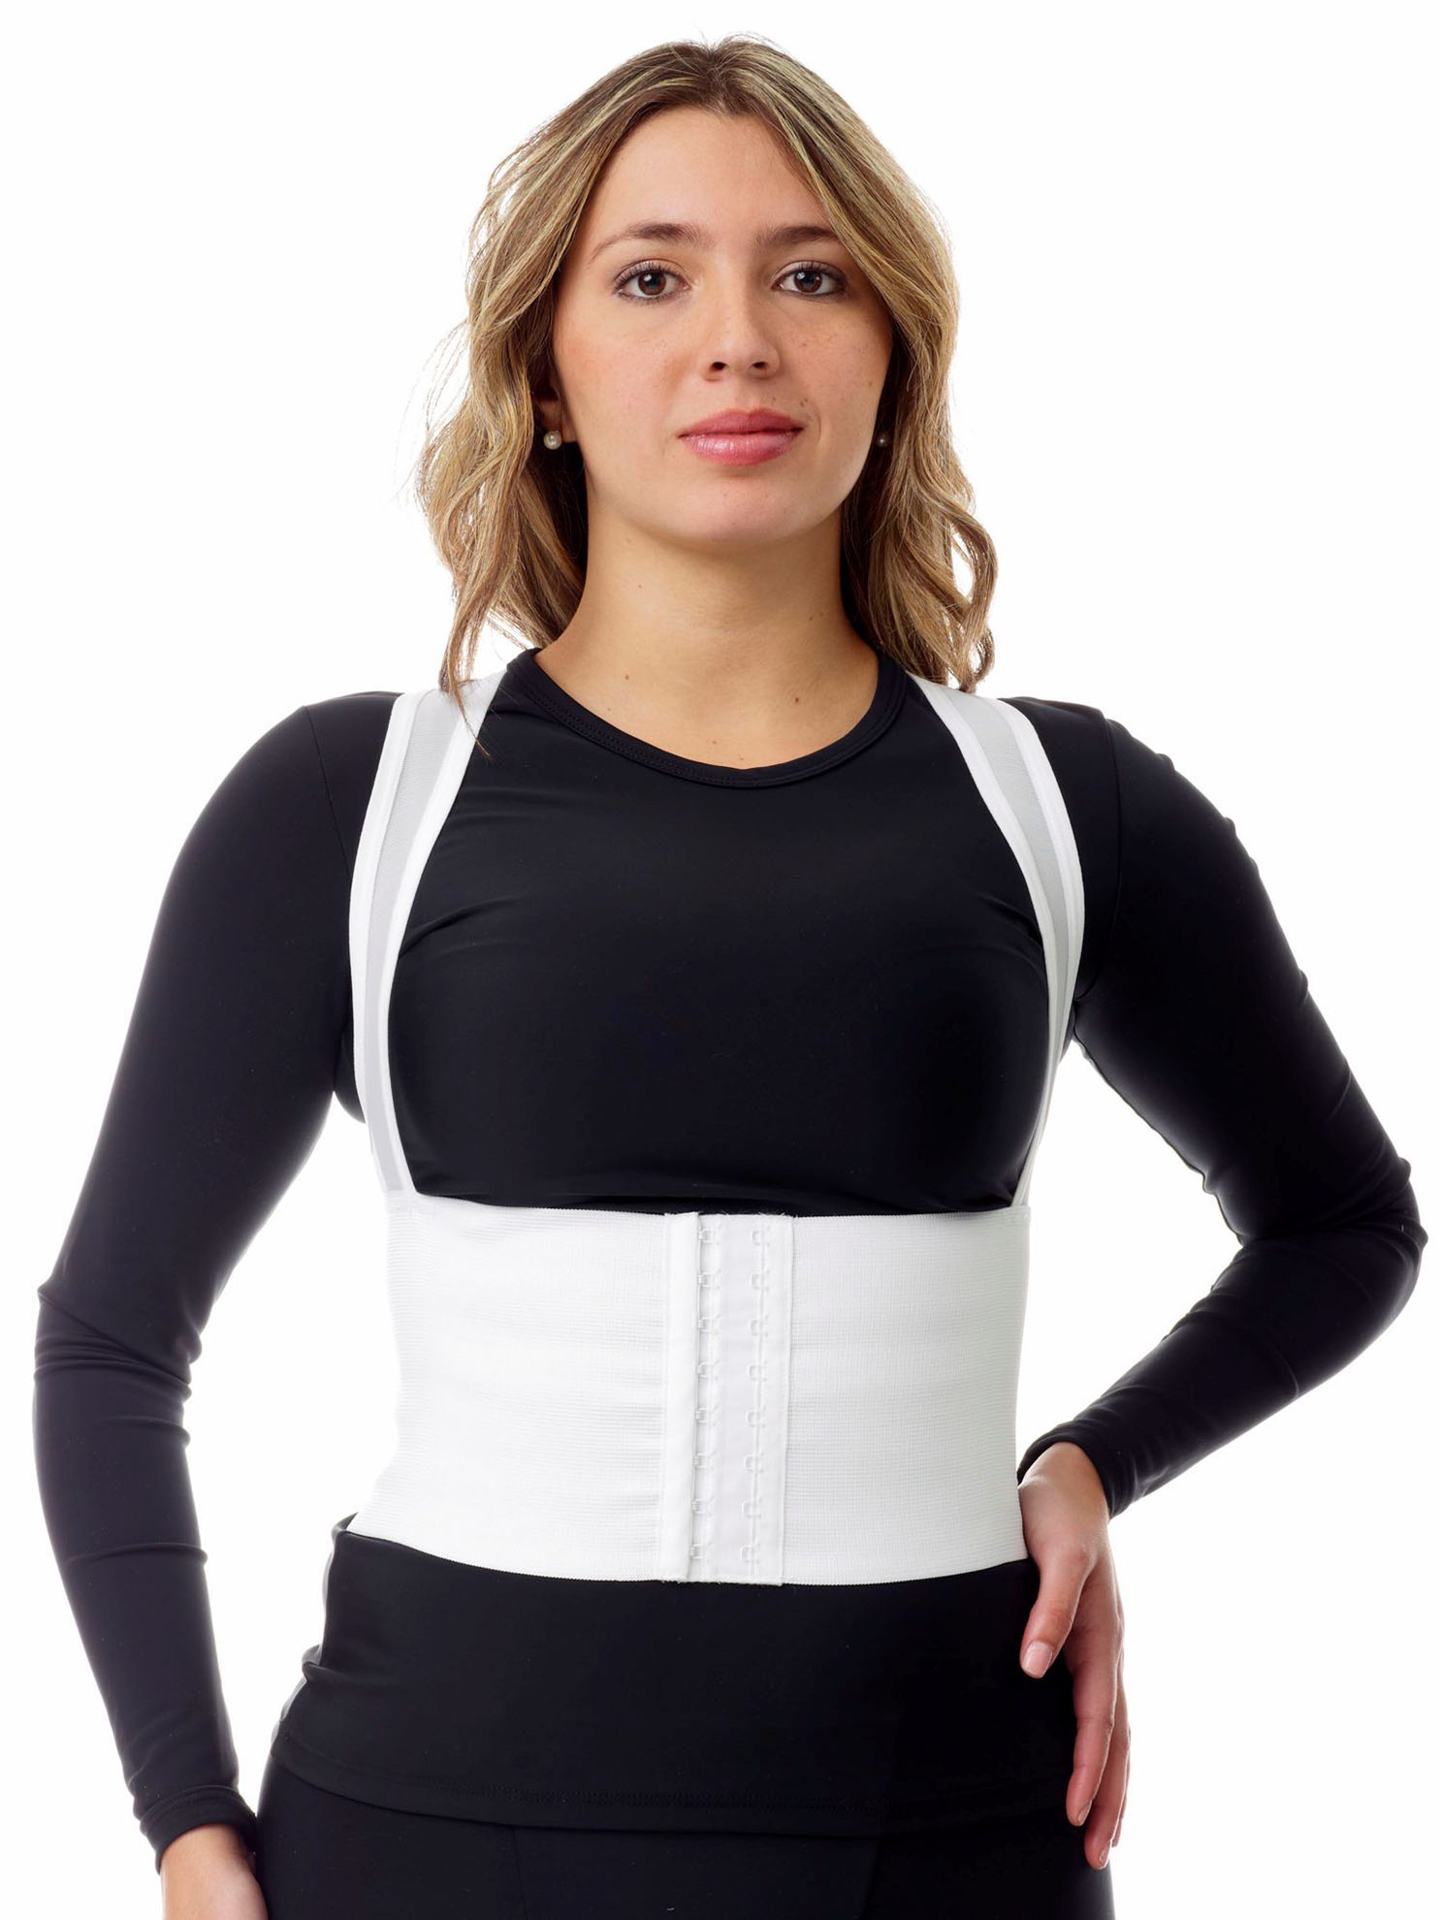 Posture clothing for women - Buy online here